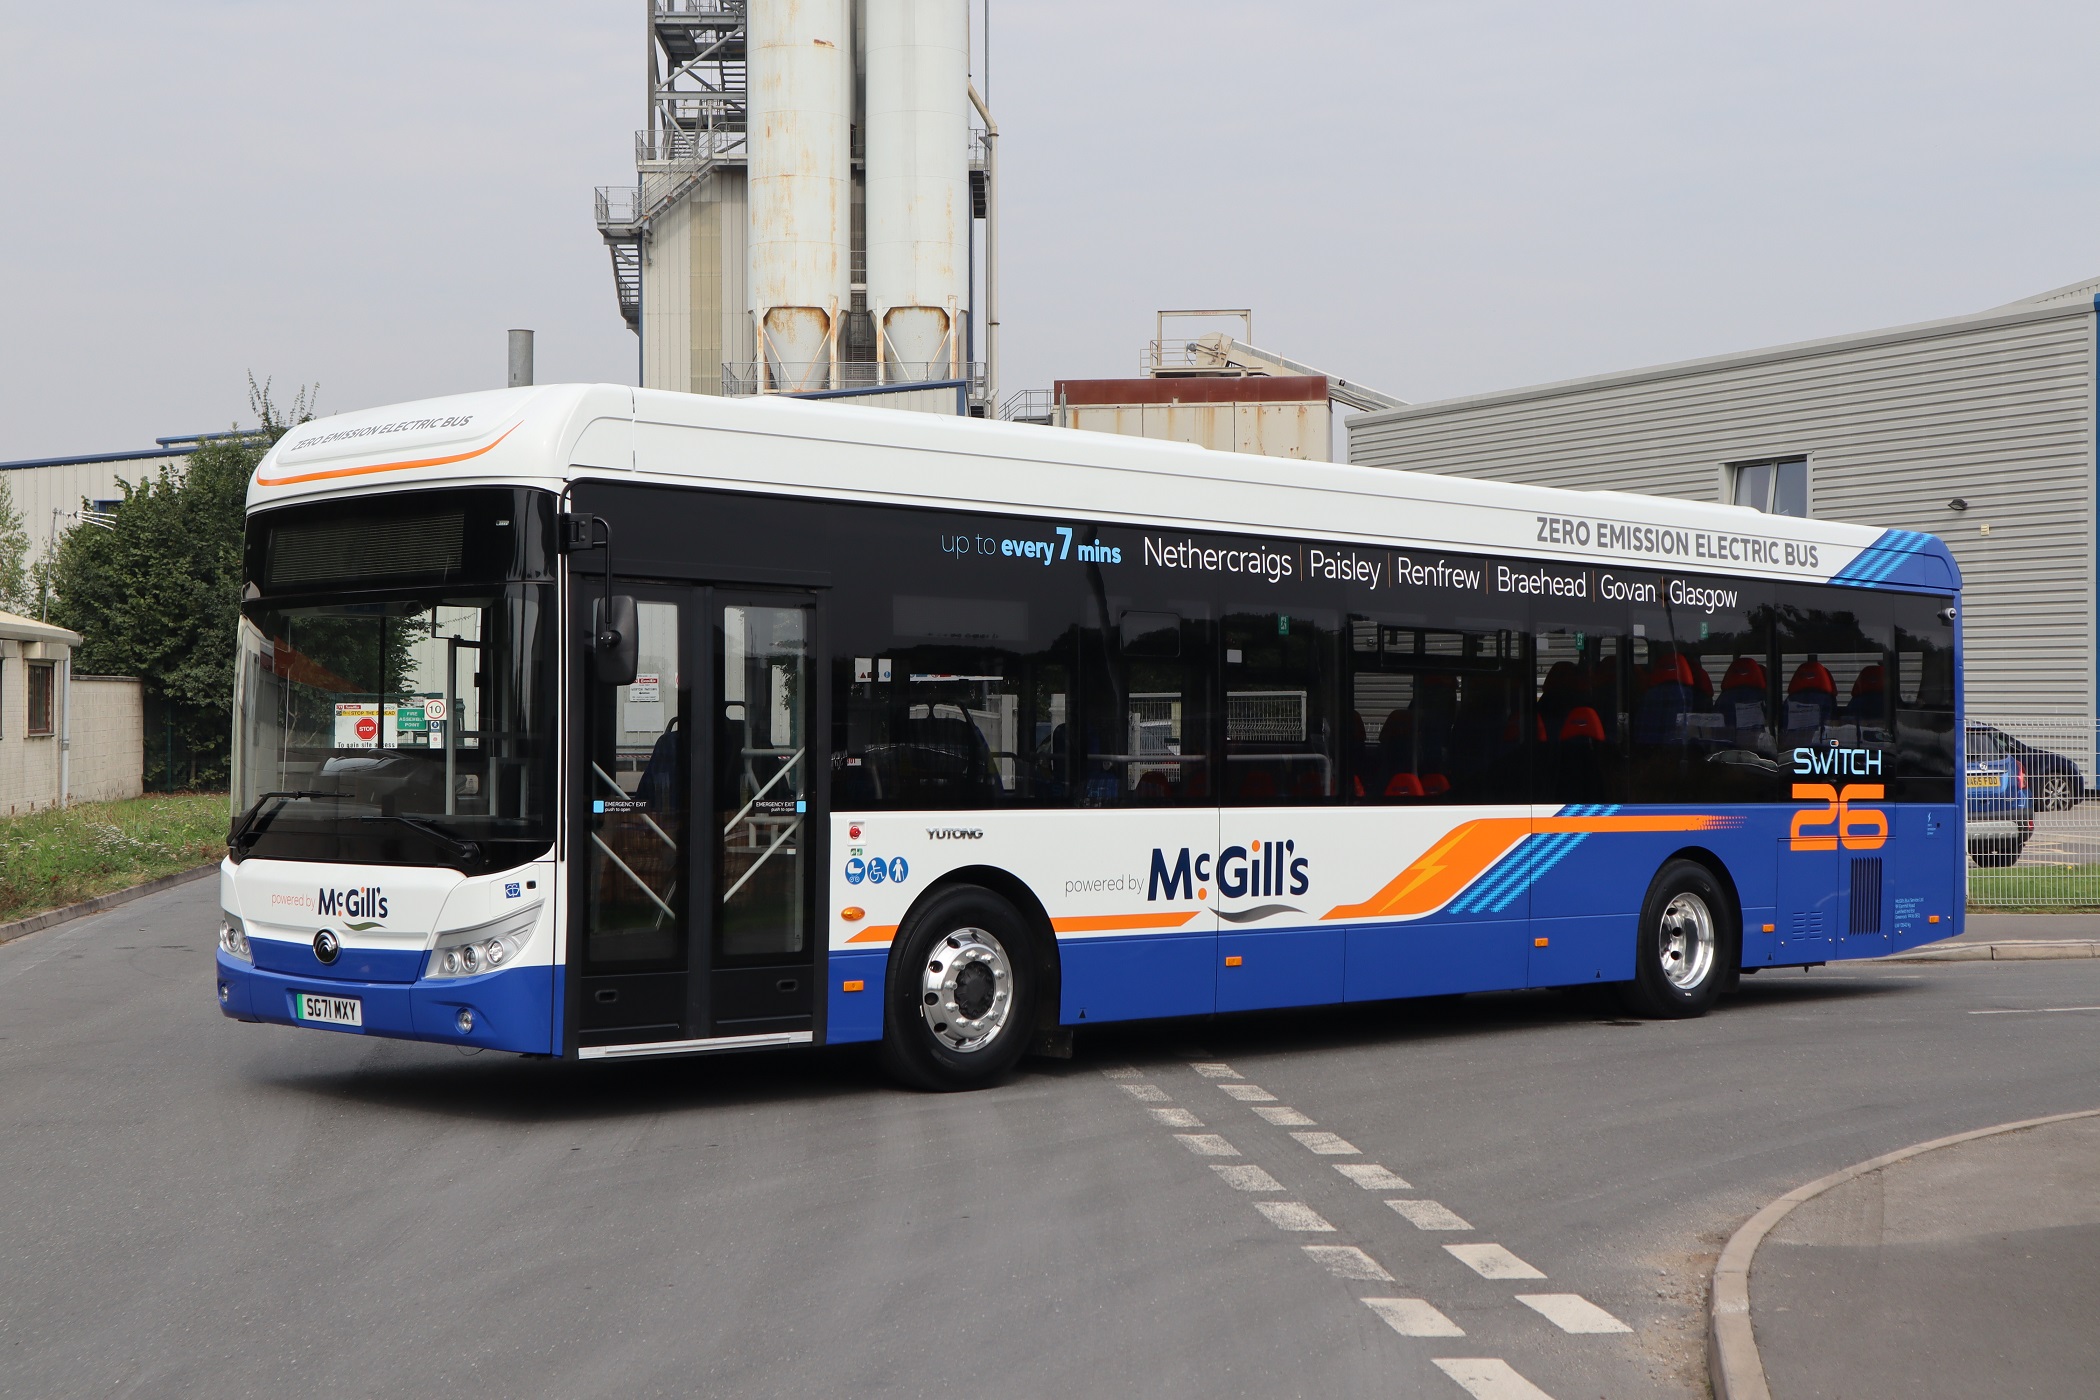 McGills and Zenobe extend existing partnership for electric buses